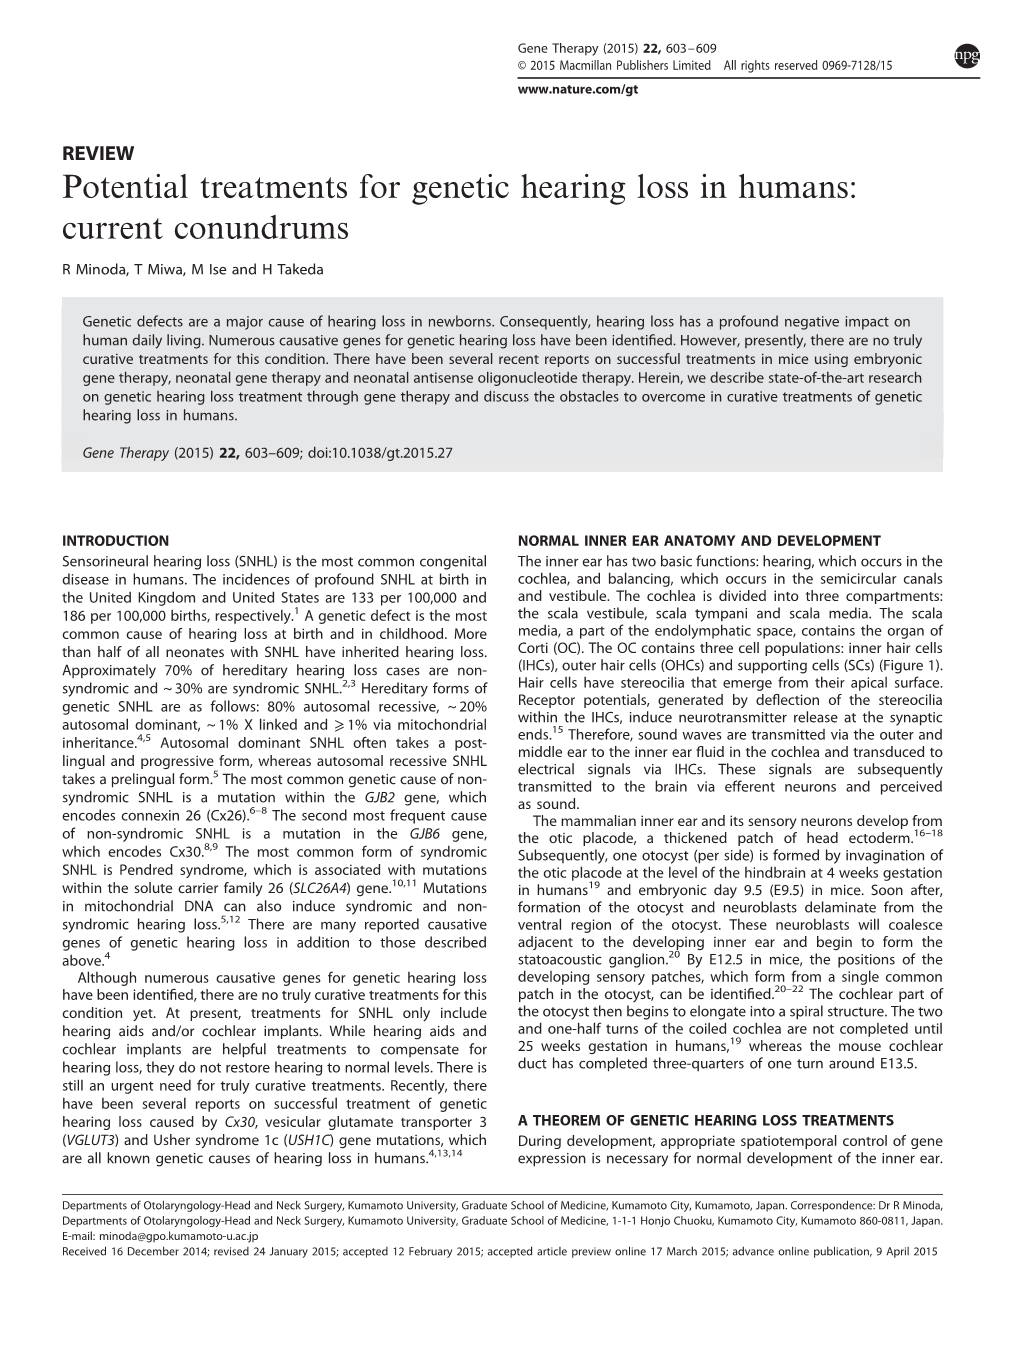 Potential Treatments for Genetic Hearing Loss in Humans: Current Conundrums